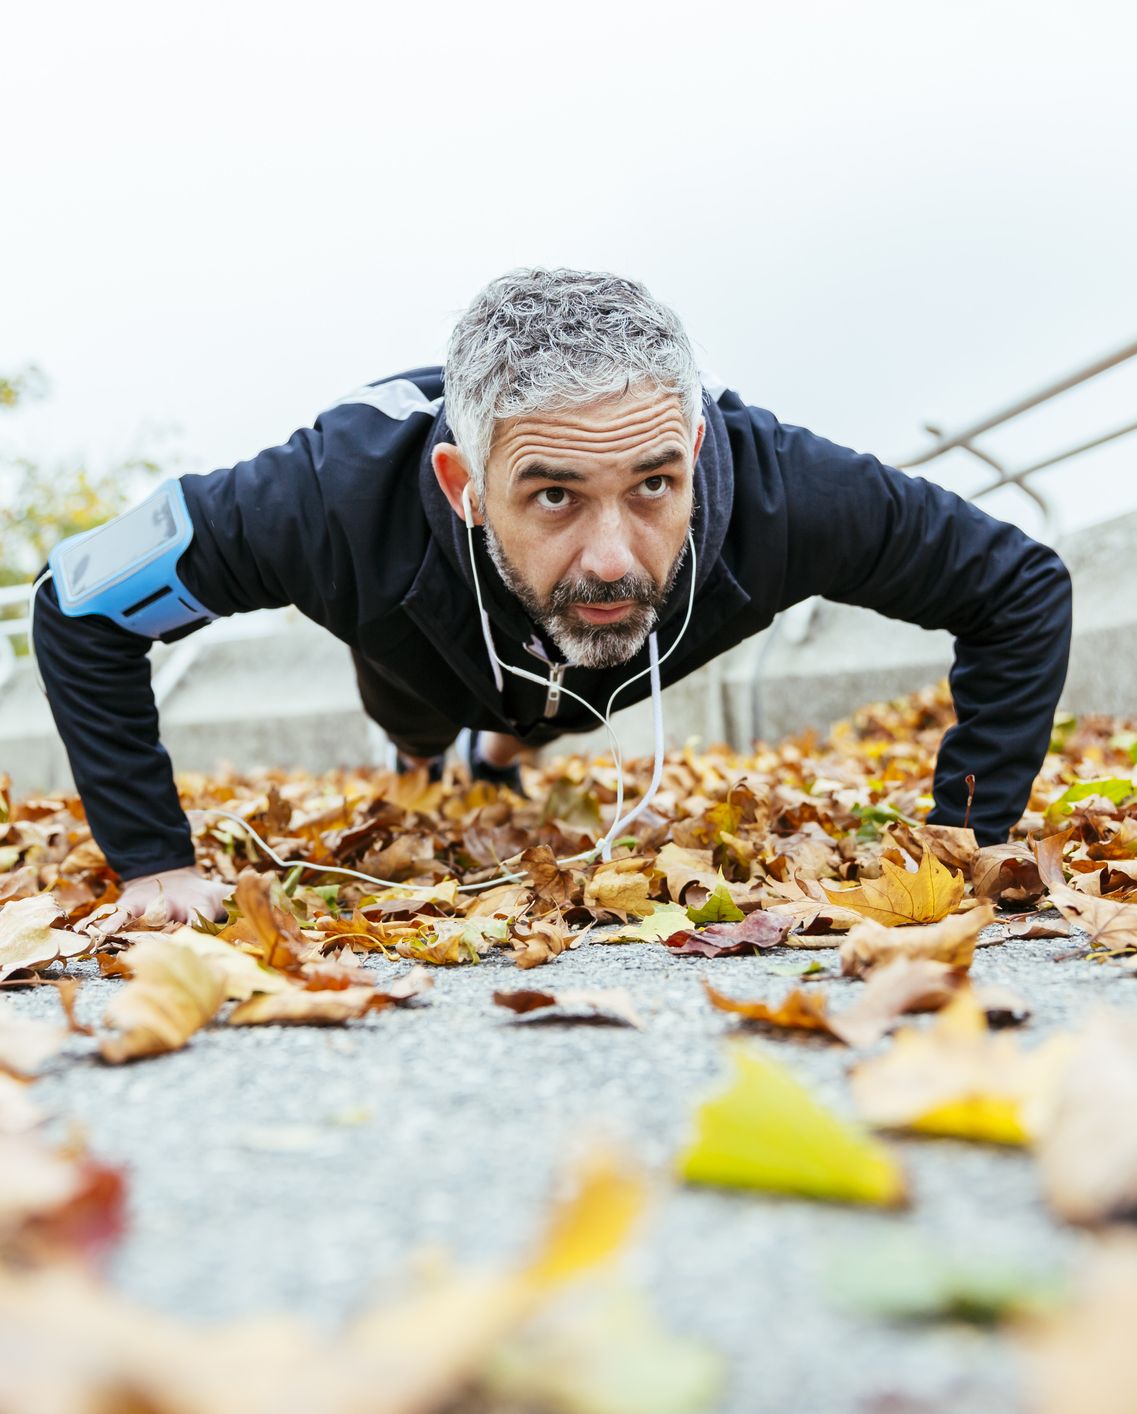 Man doing pushups surrounded by autumn leaves